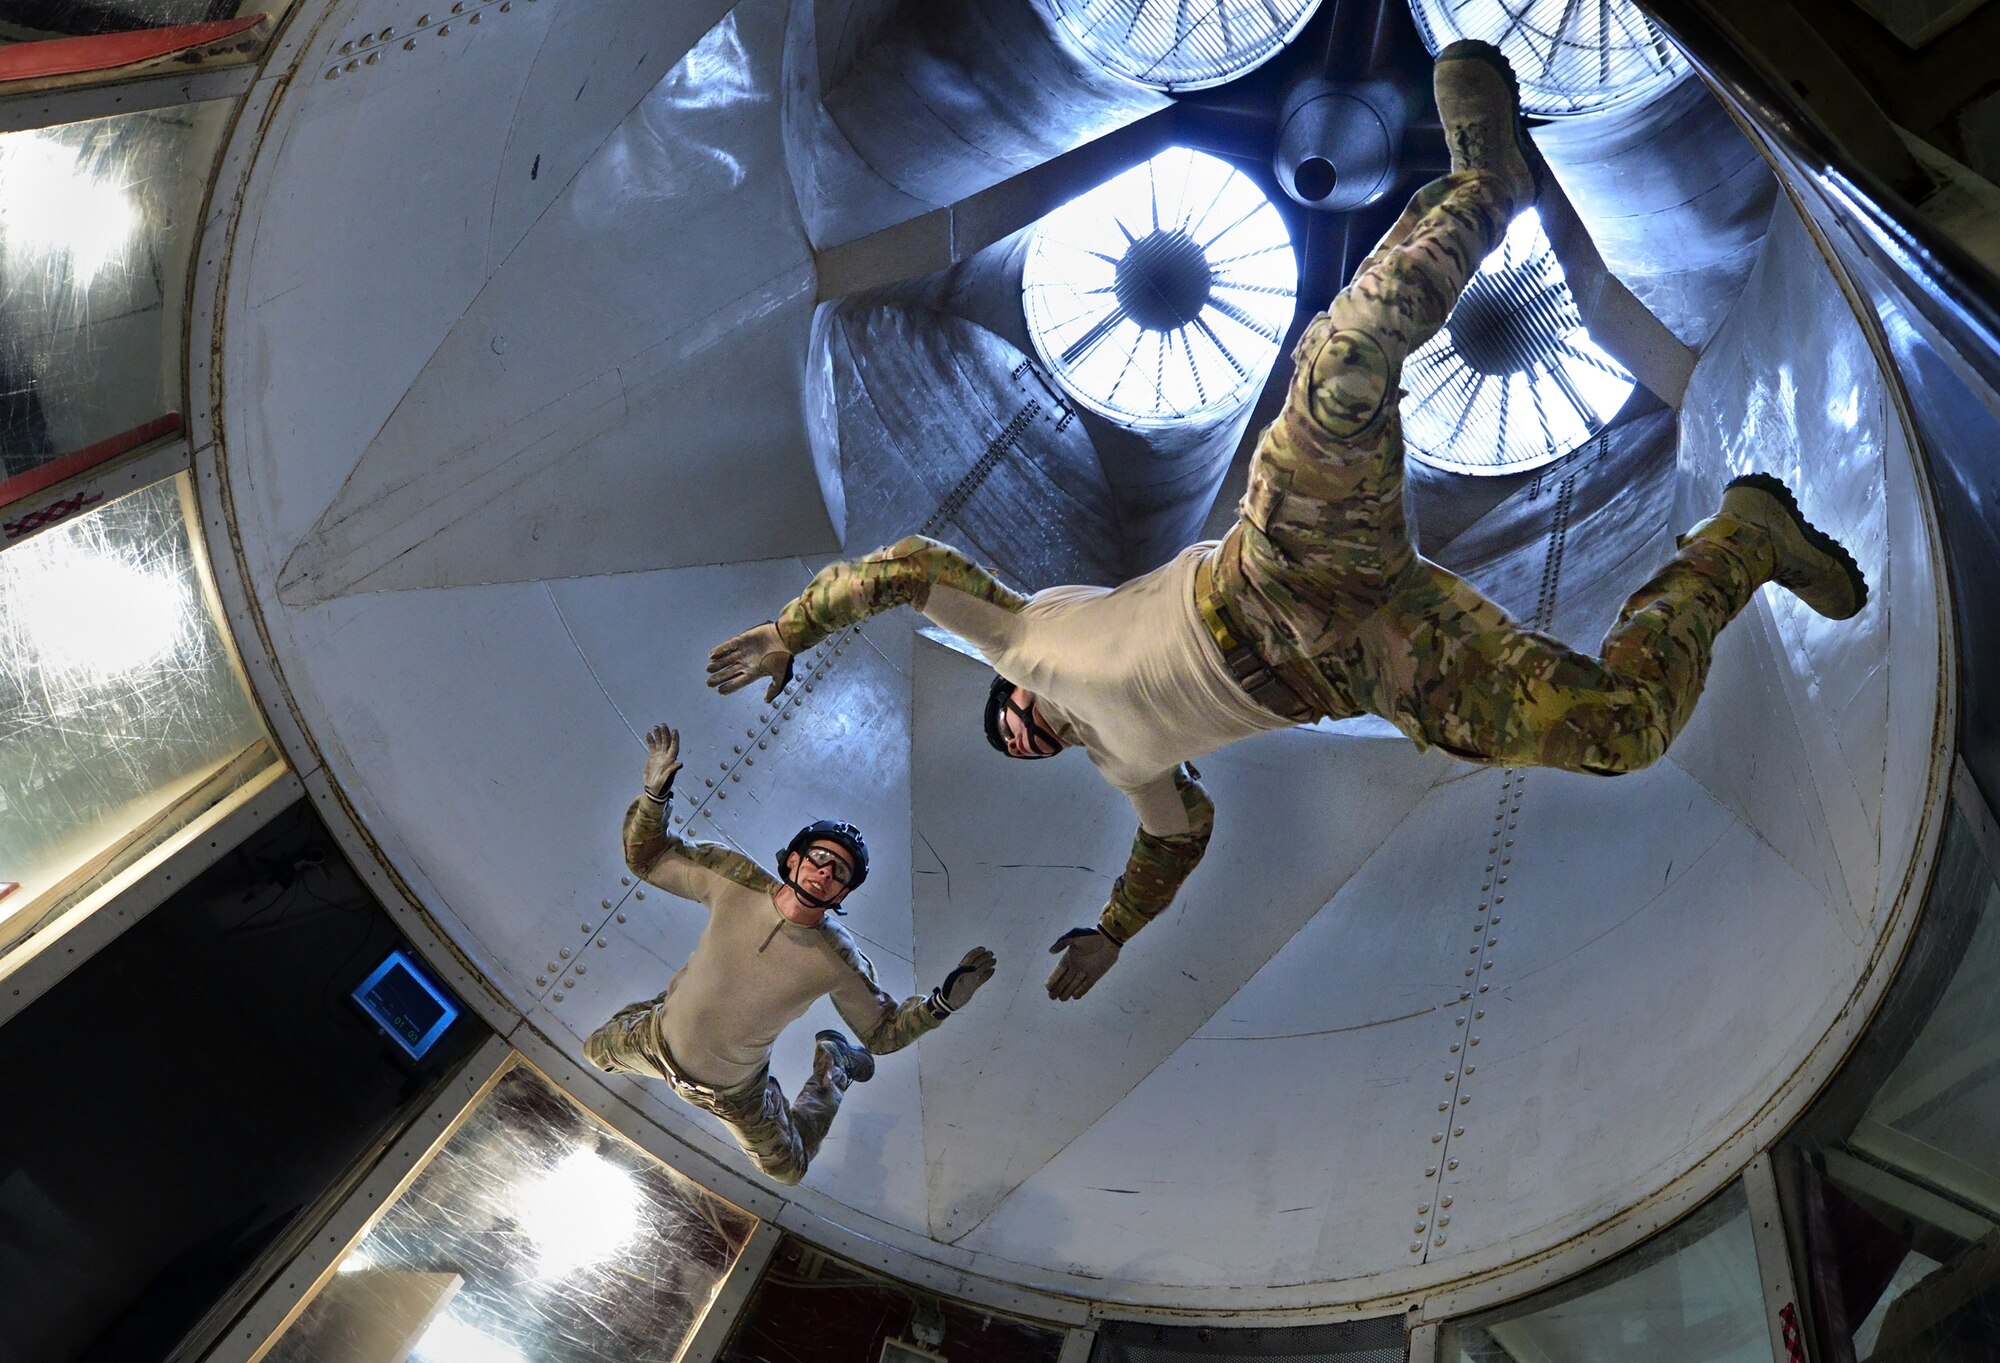 ELOY, Arizona - Two pararescuemen assigned to the 306th Rescue Squadron, Davis-Monthan Air Force Base, Tucson, Arizona, train in the SkyVenture Arizona skydiving wind tunnel in Eloy, Arizona, March 2, 2014. The Special Forces members use the tunnel to practice techniques. Pararescuemen are combat ready rescue and recovery specialists. (U.S. Air Force photo/Tech. Sgt. Frank Oliver)